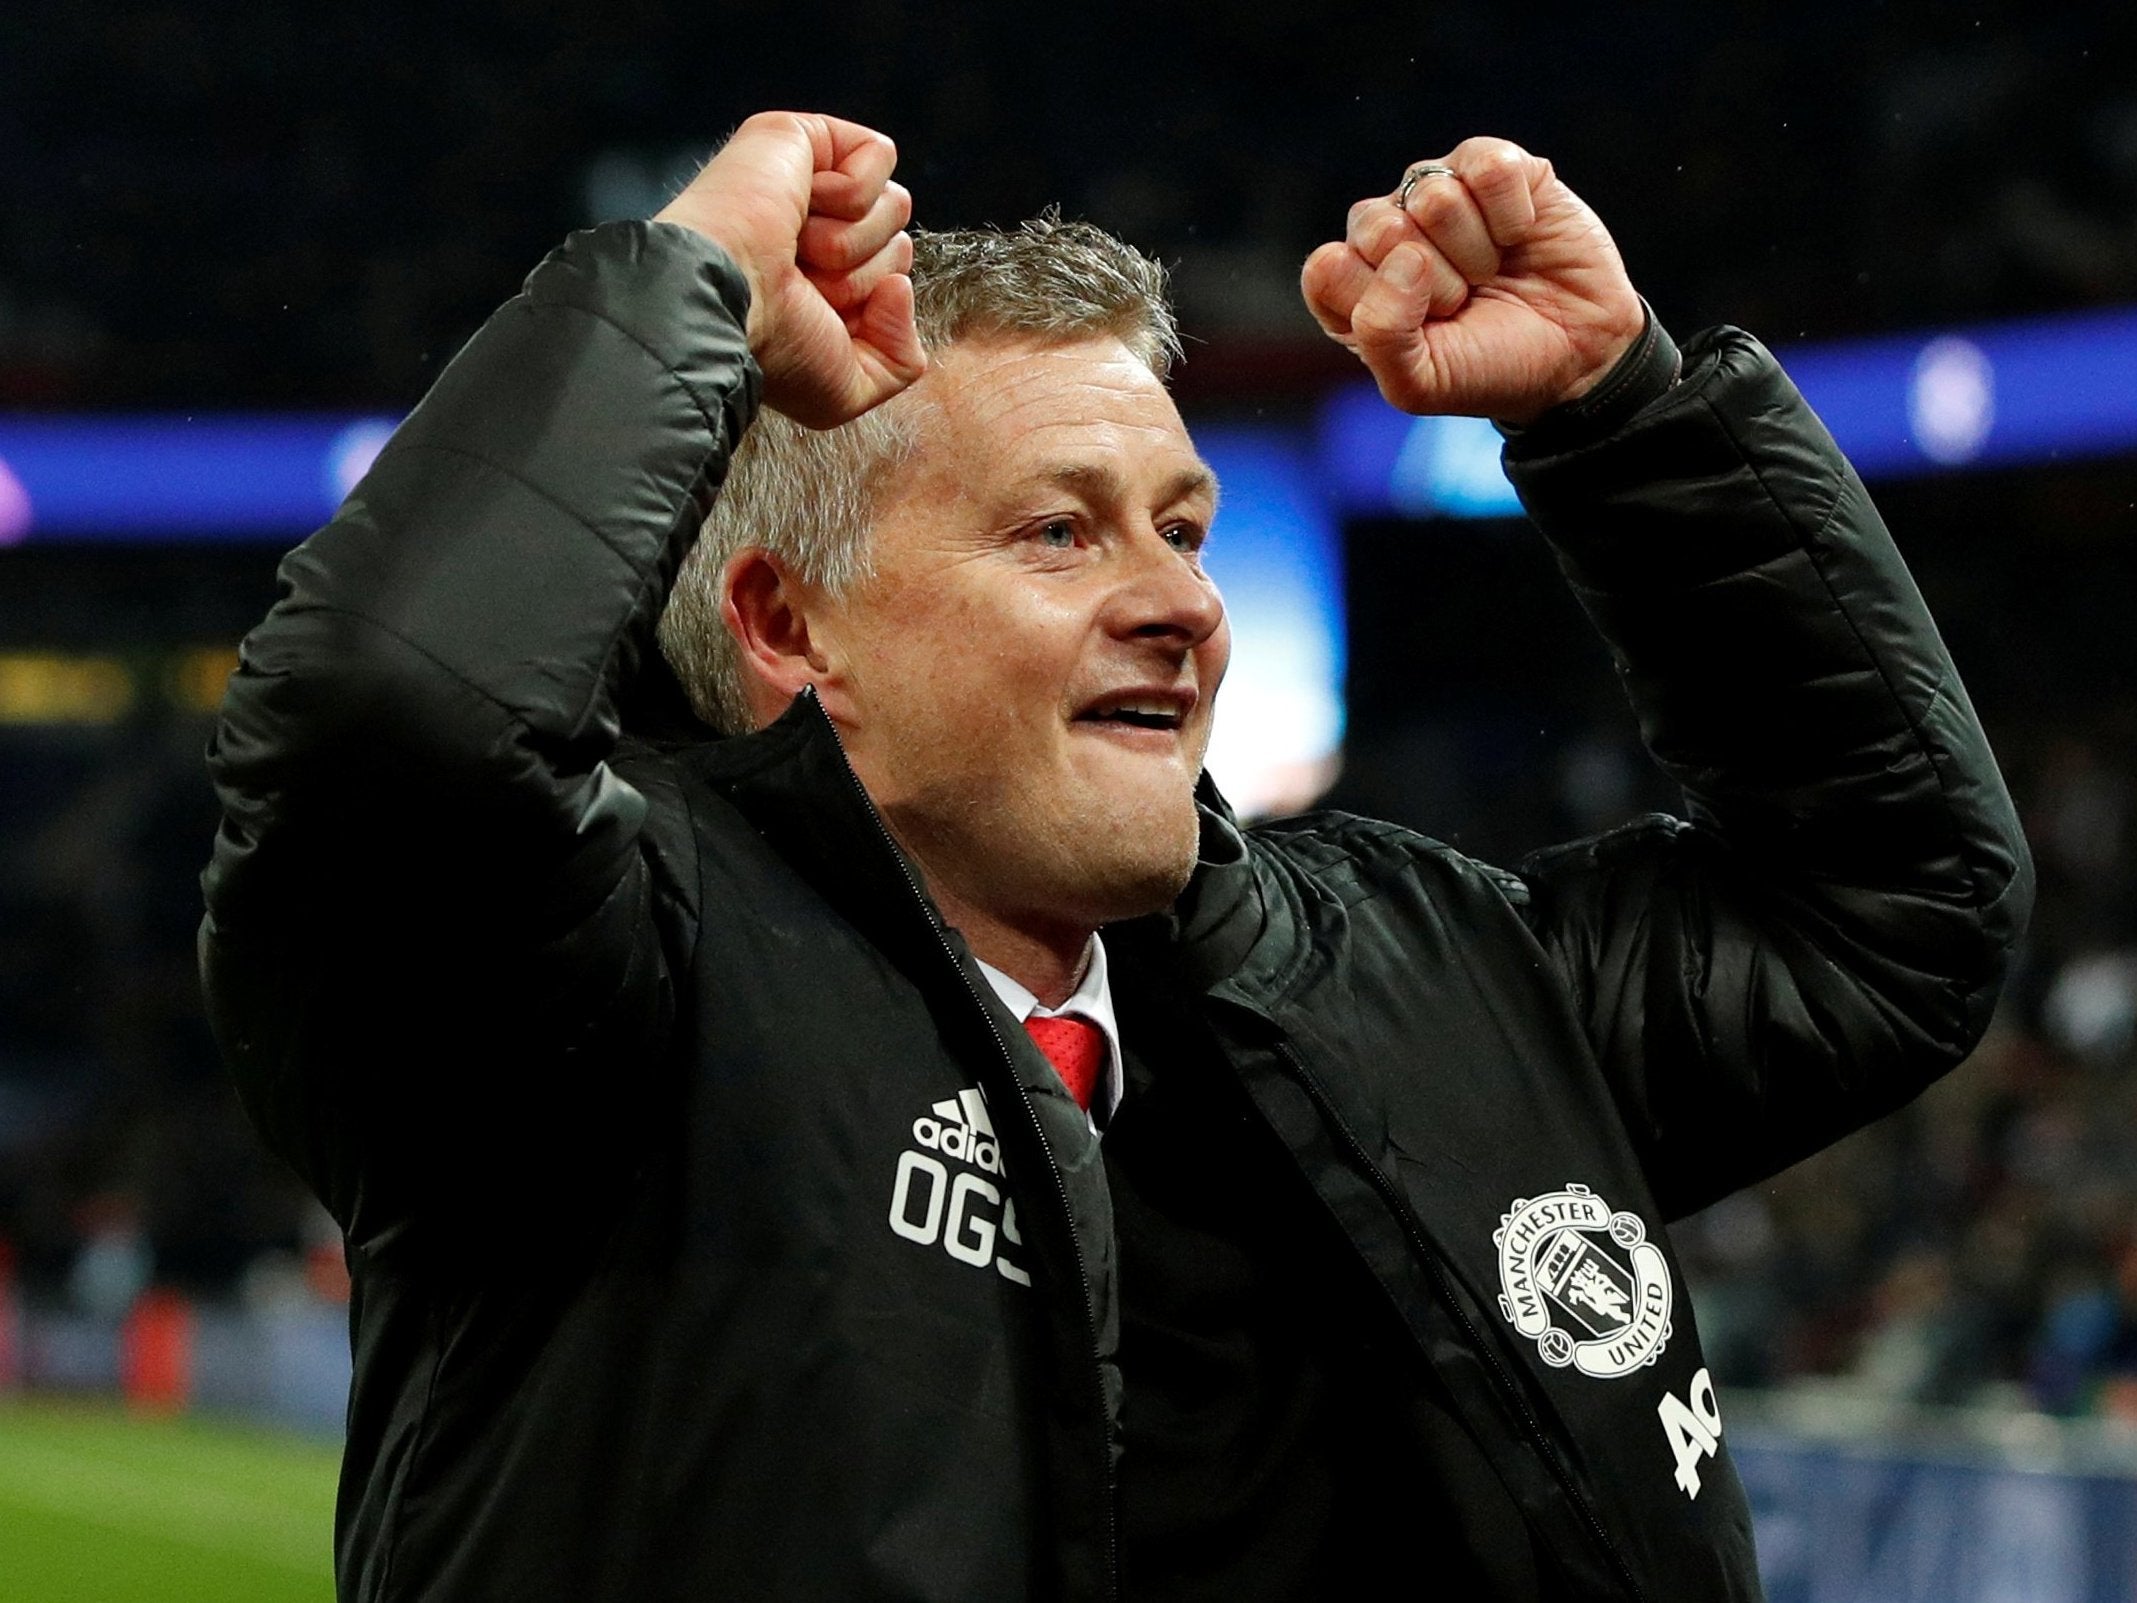 Solskjaer has implored his players to bring the same energy to each upcoming match as against PSG (Reuters)